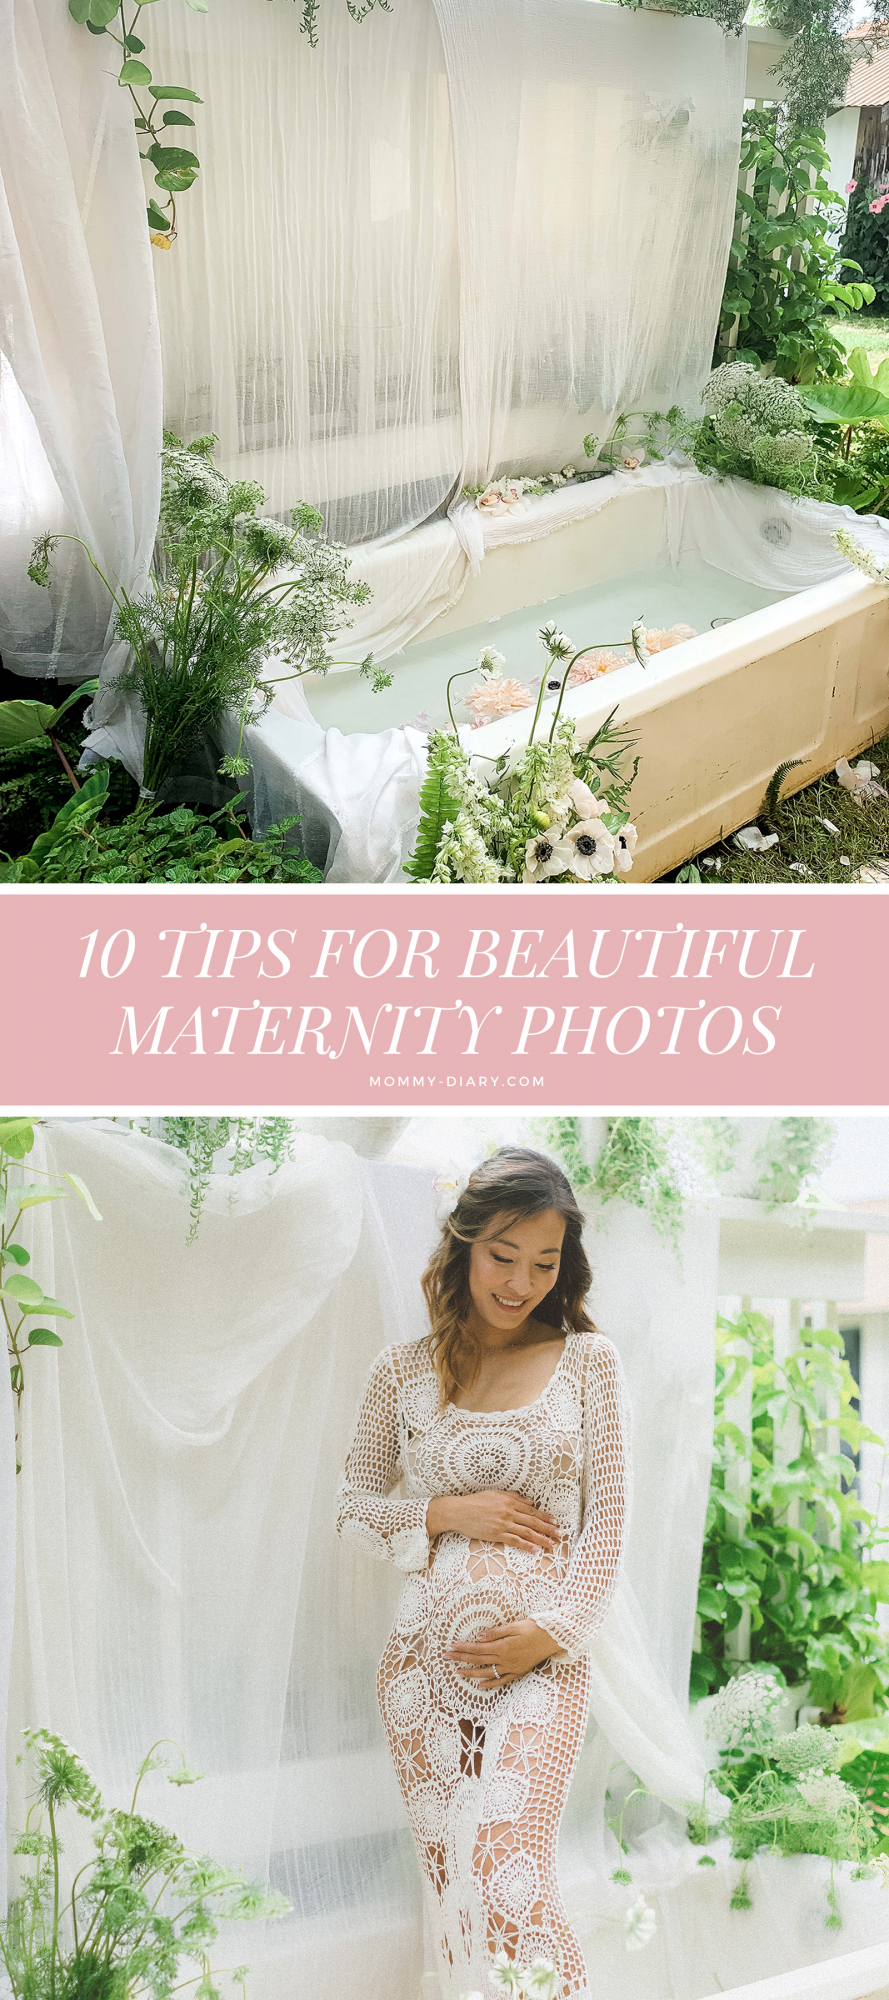 10-tips-for-beautiful-maternity-photos